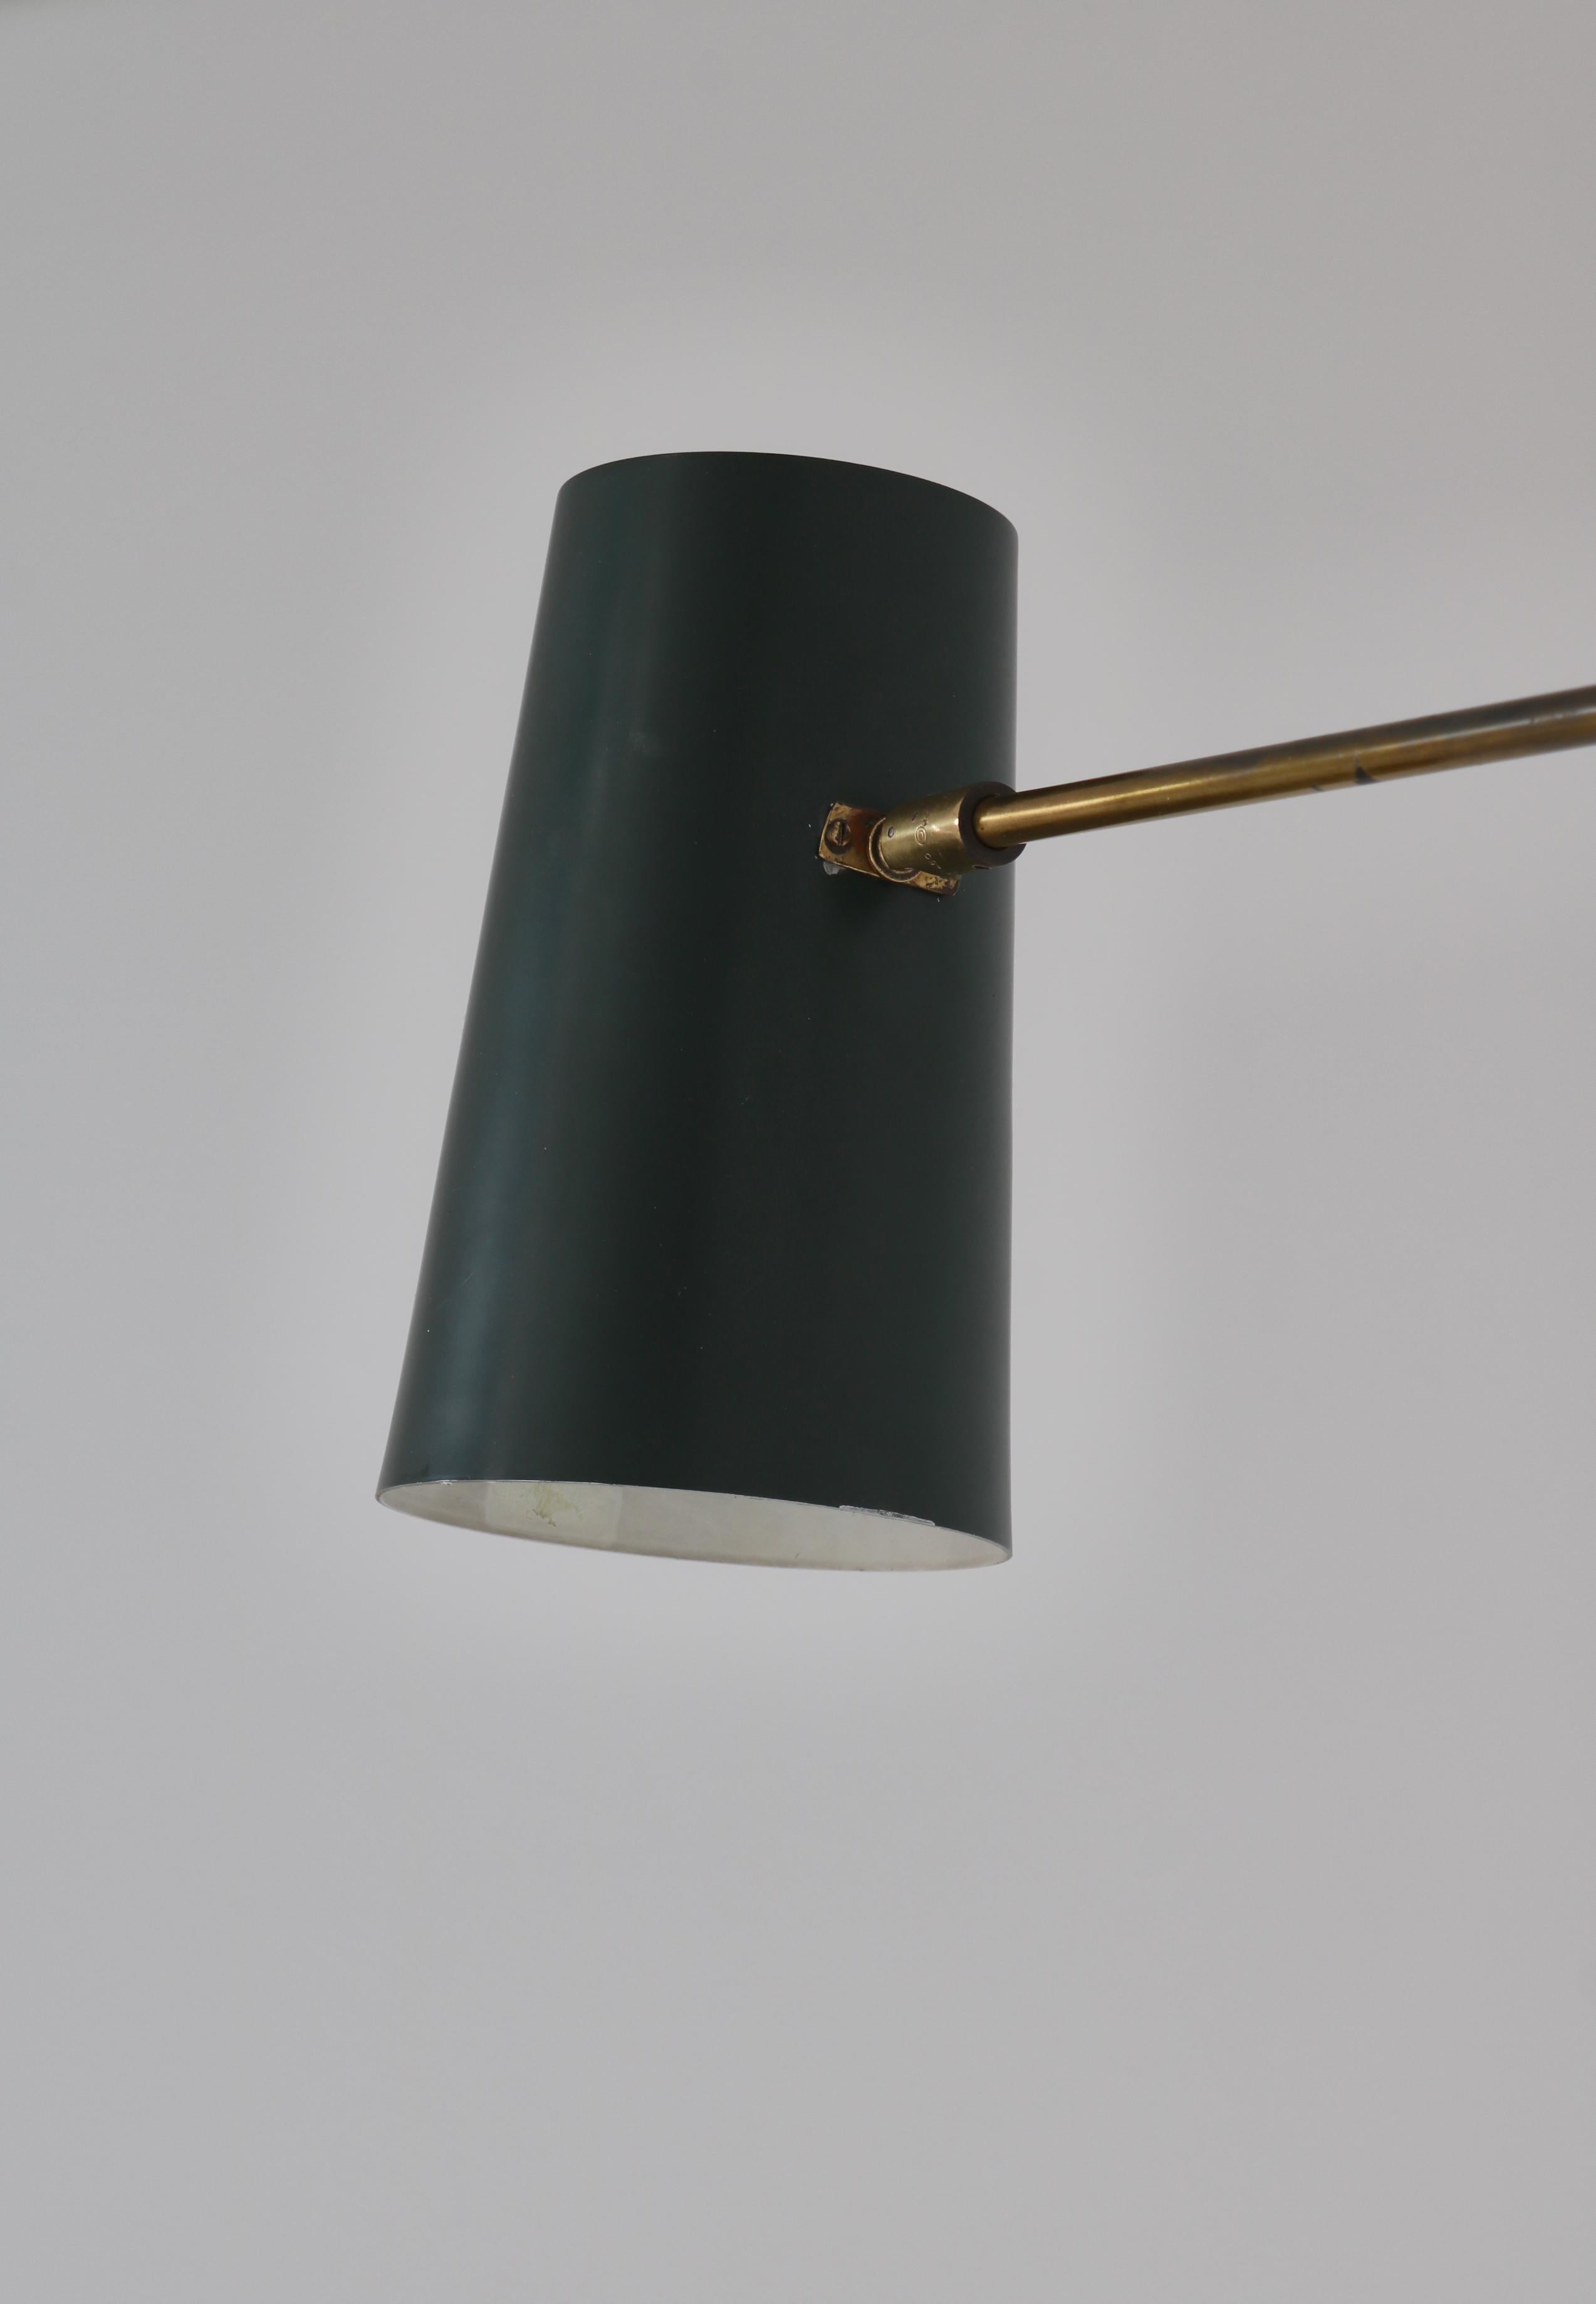 Scandinavian Modern Brass Wall Lamps w. Green Shades by T.H. Valentiner, 1960s For Sale 4